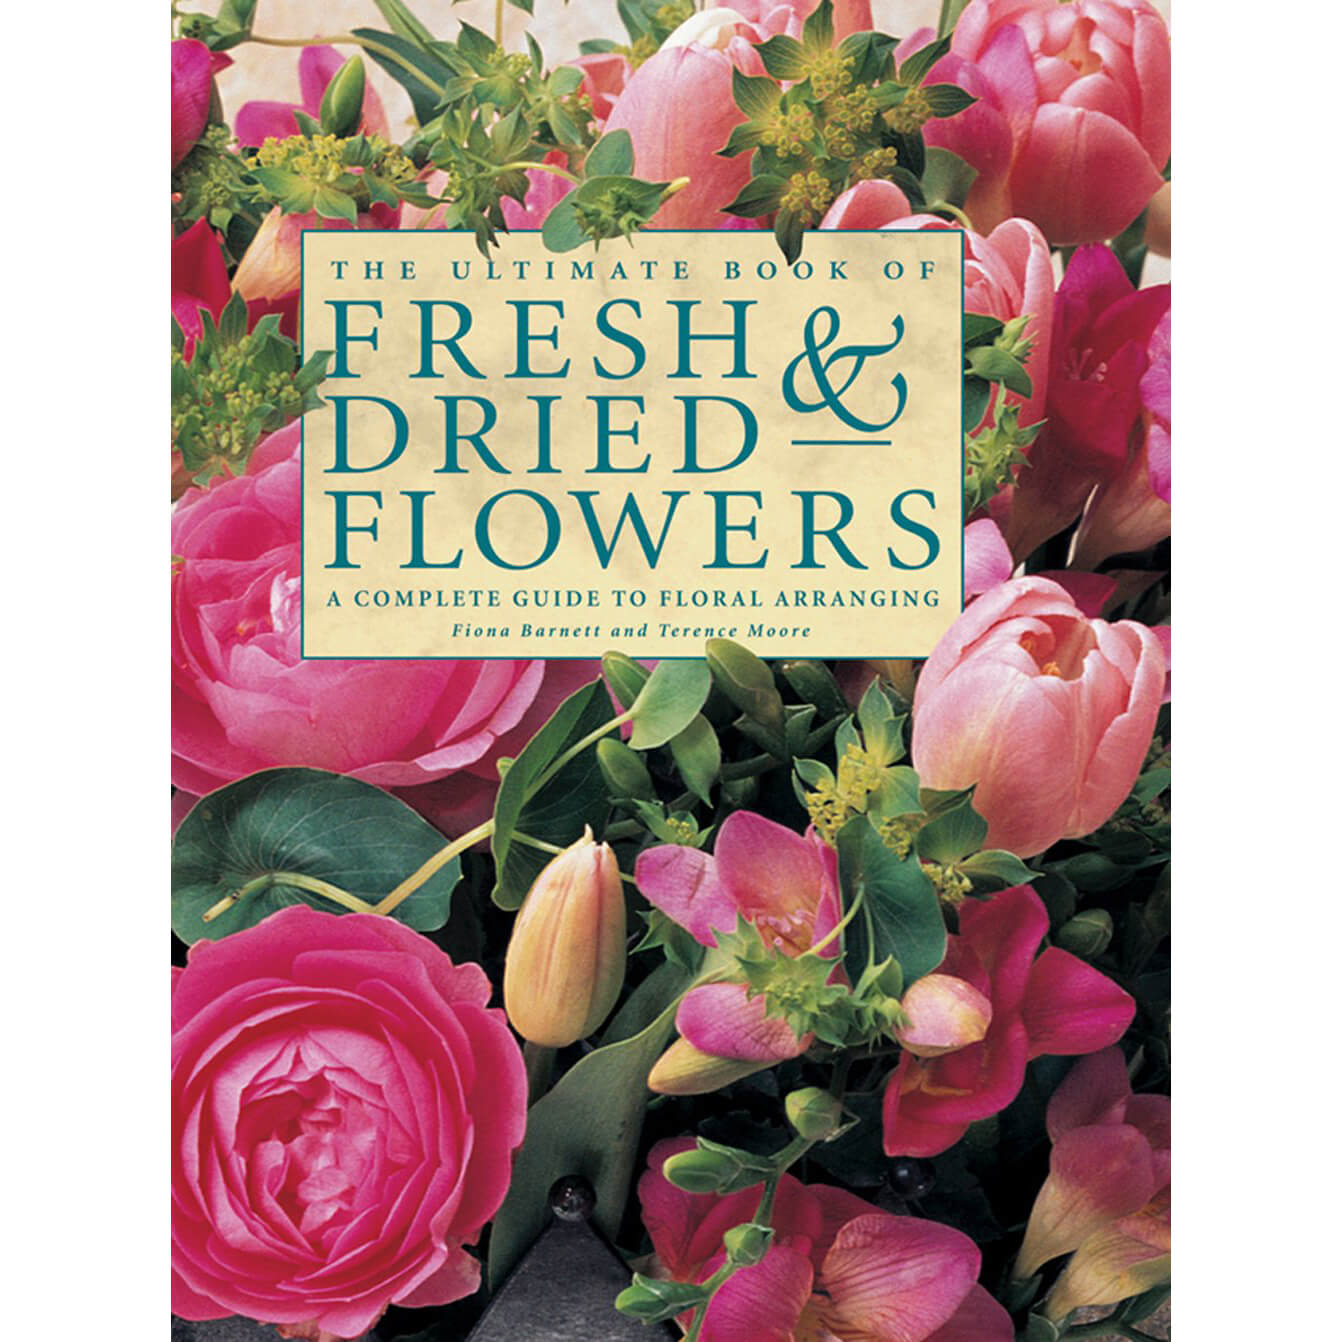 The Ultimate Book of Fresh & Dried Flowers front cover.